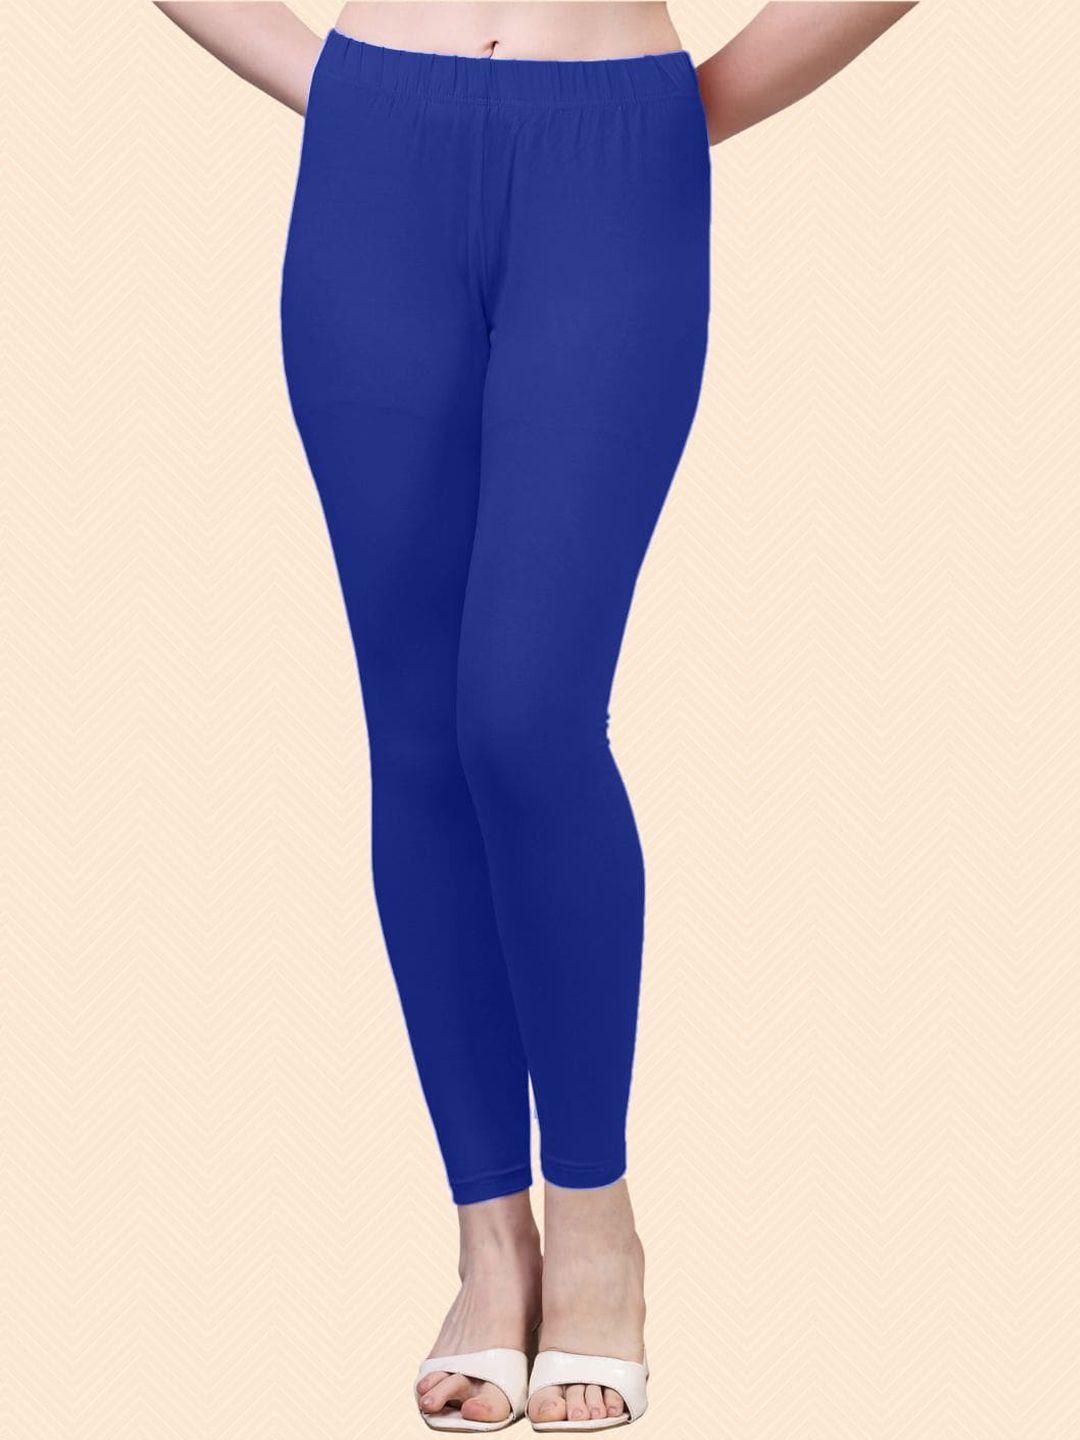 here&now cotton ankle length leggings